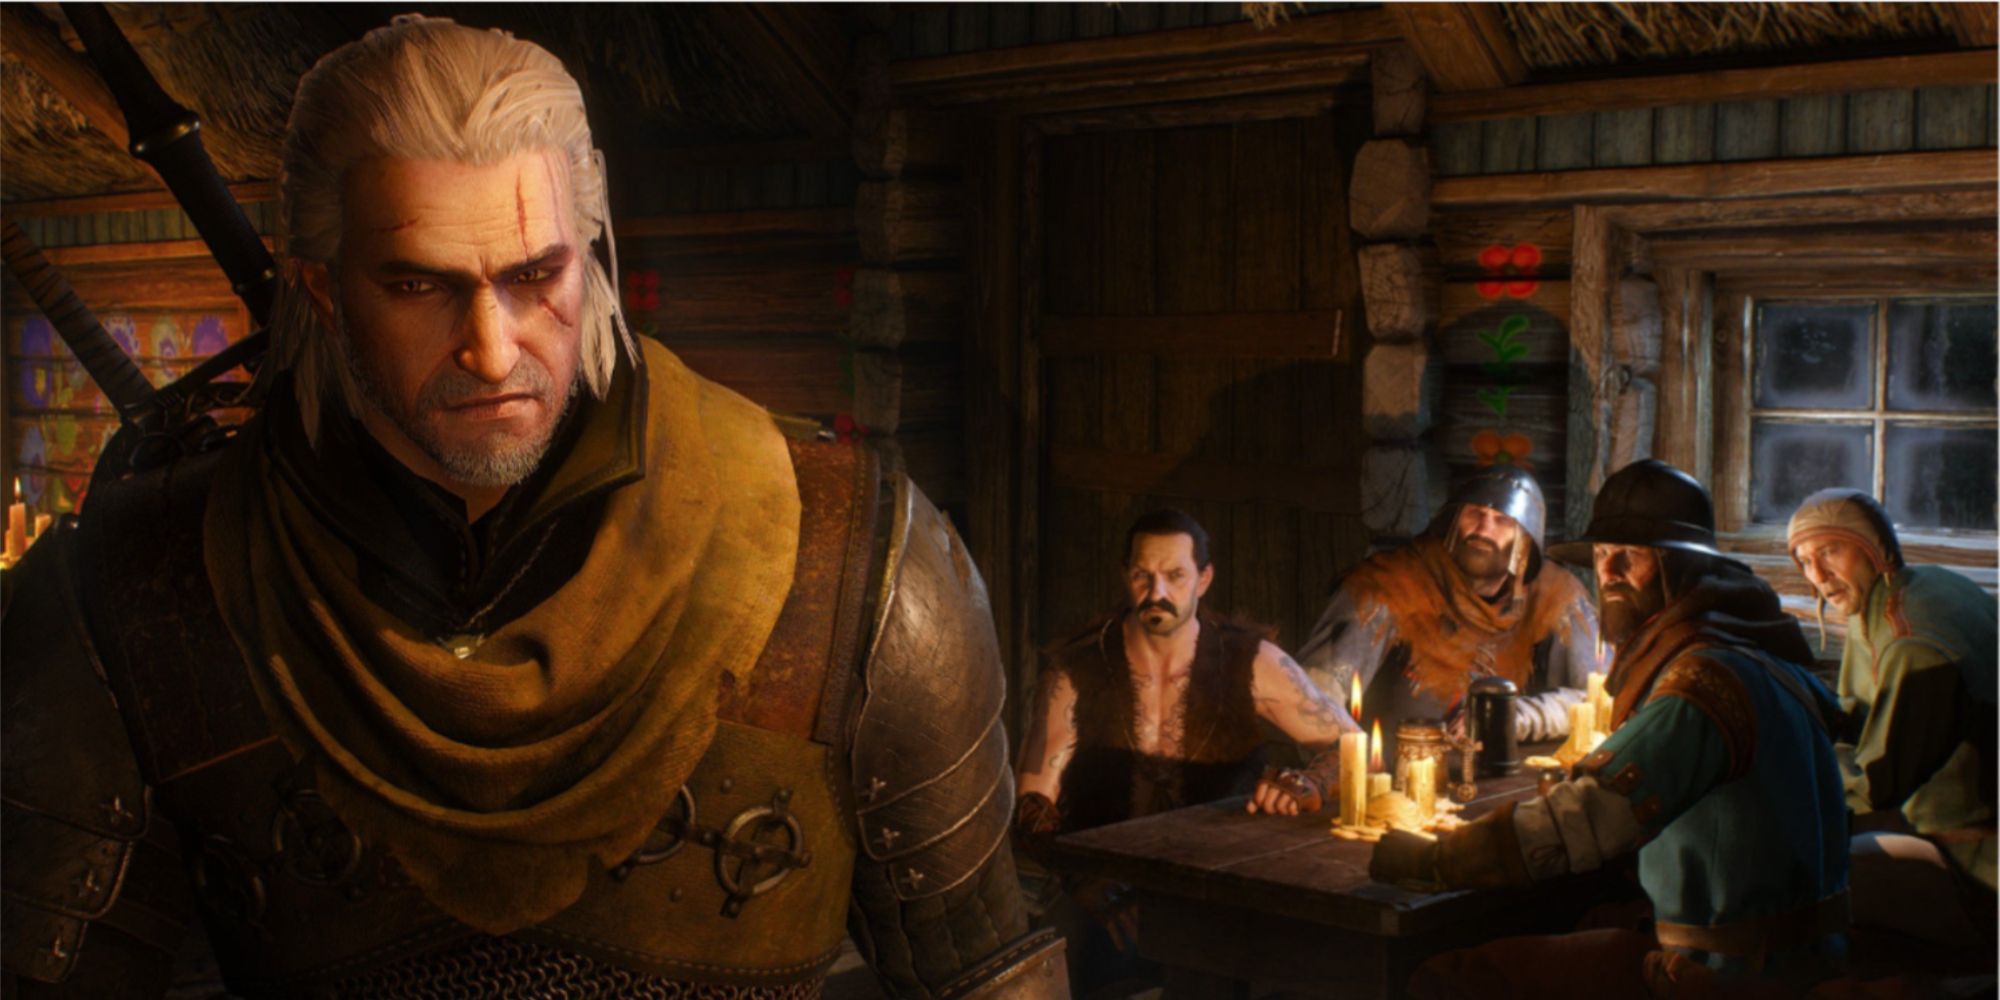 geralt being stared at in a tavern in the witcher 3